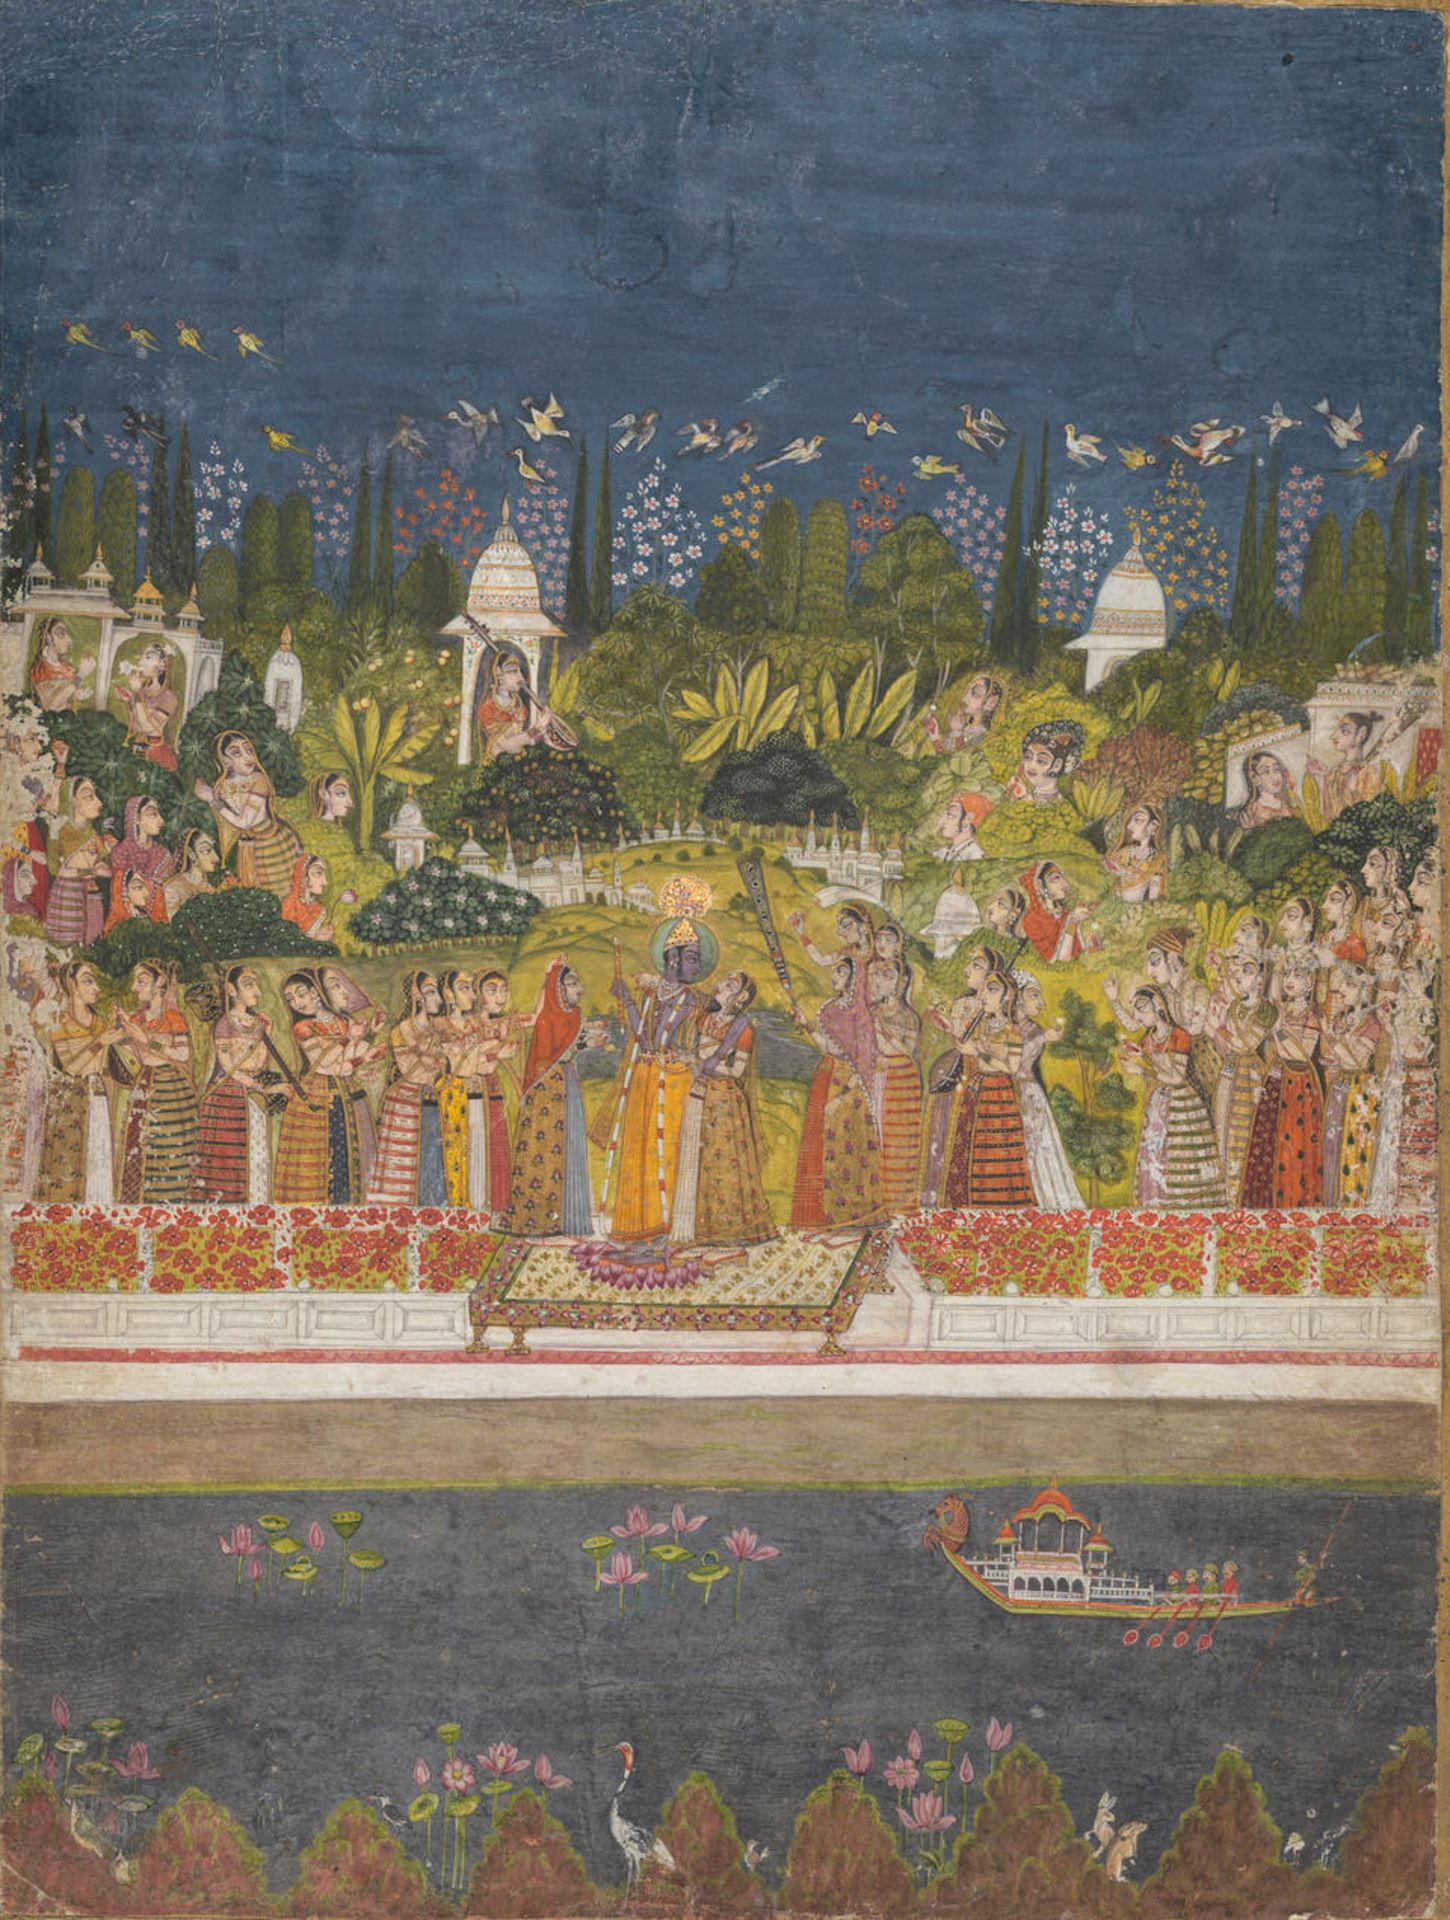 AN ILLUSTRATION TO A KRISHNALILA SERIES: KRISHNA CAVORTING WITH THE GOPIS BY A LAKE KISHANGARH, ...